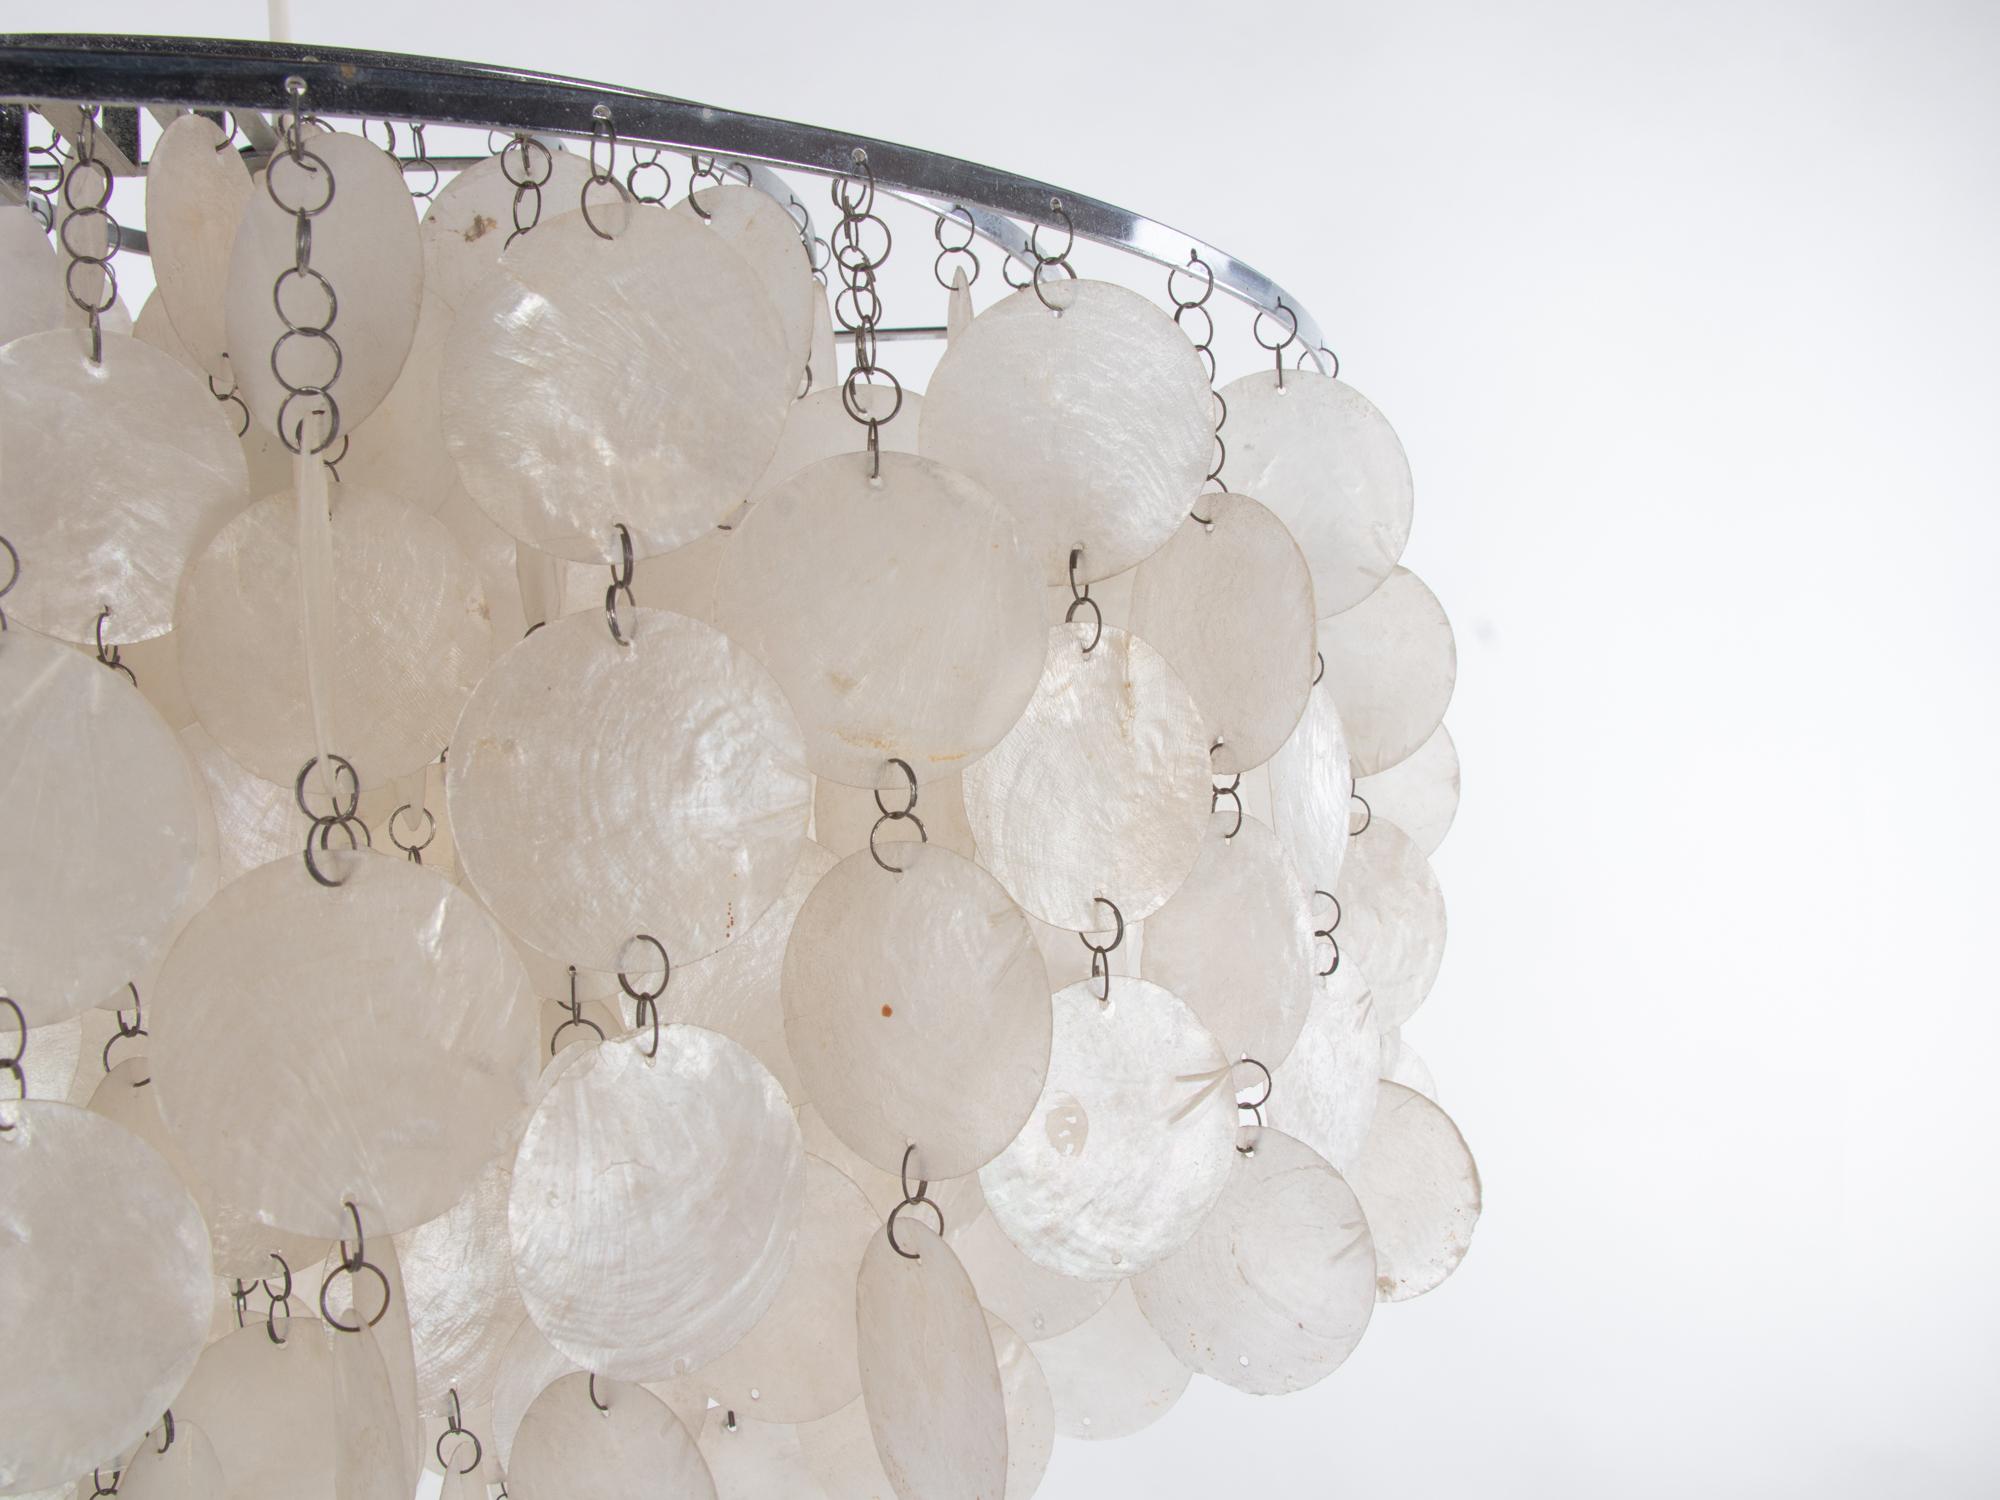 Swiss '1 of 3' Fun Shell Chandelier by Verner Panton for J. Luber Ag, Switzerland 1964 For Sale